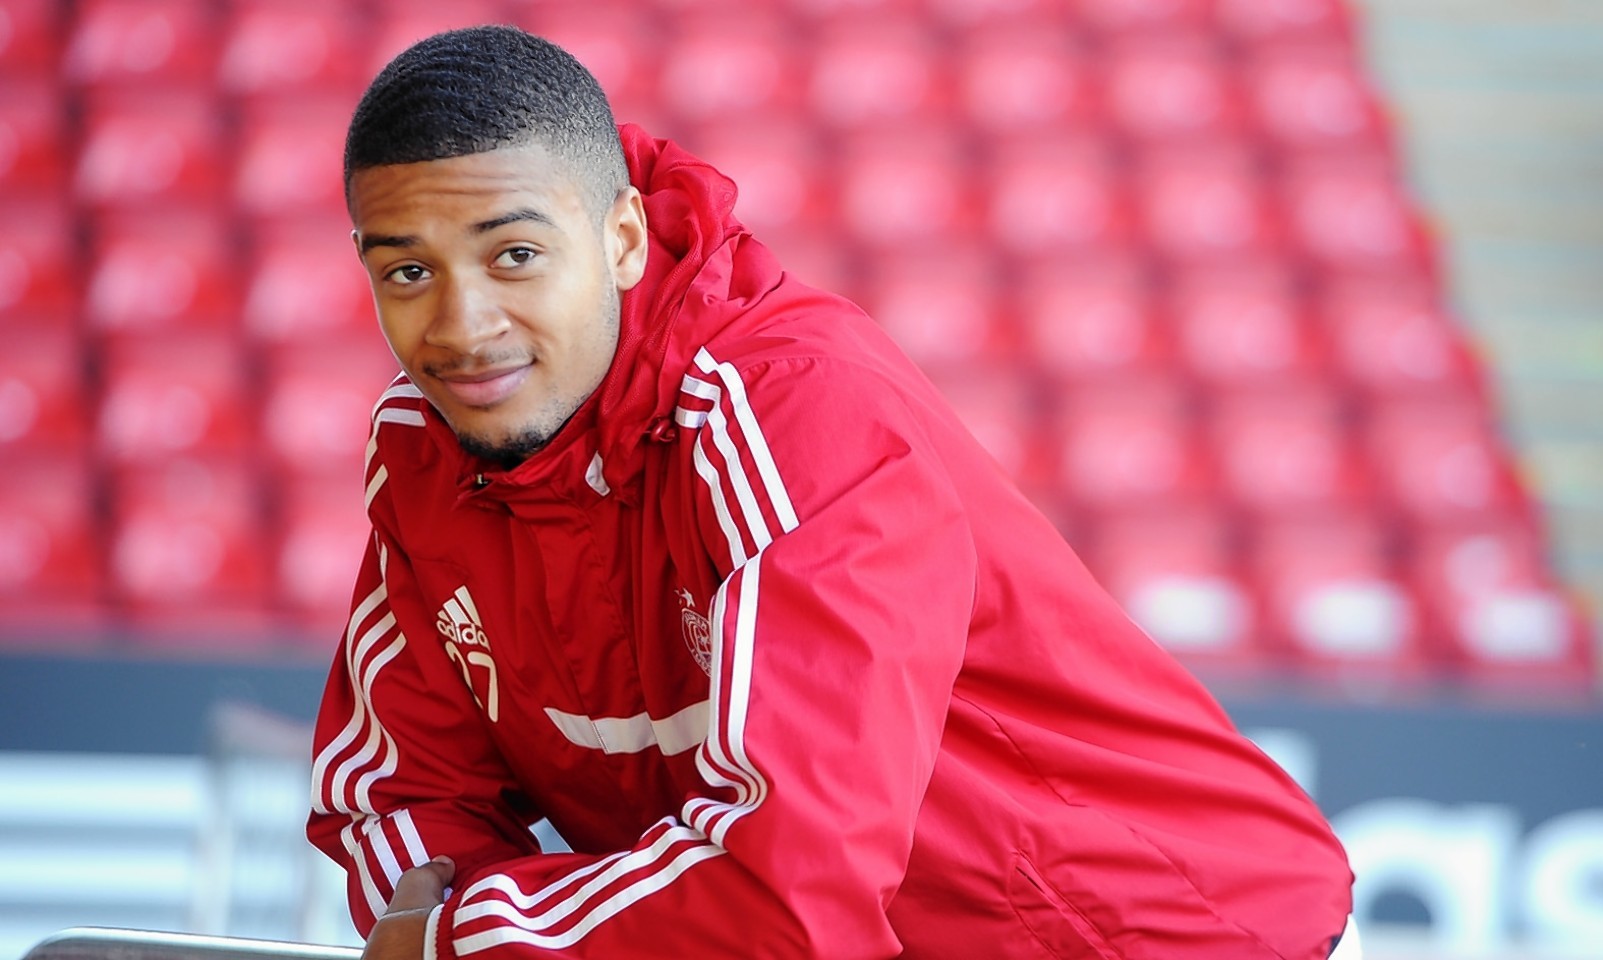 Michael Hector proved a big hit during his short spell with the Dons and could now be heading to Chelsea